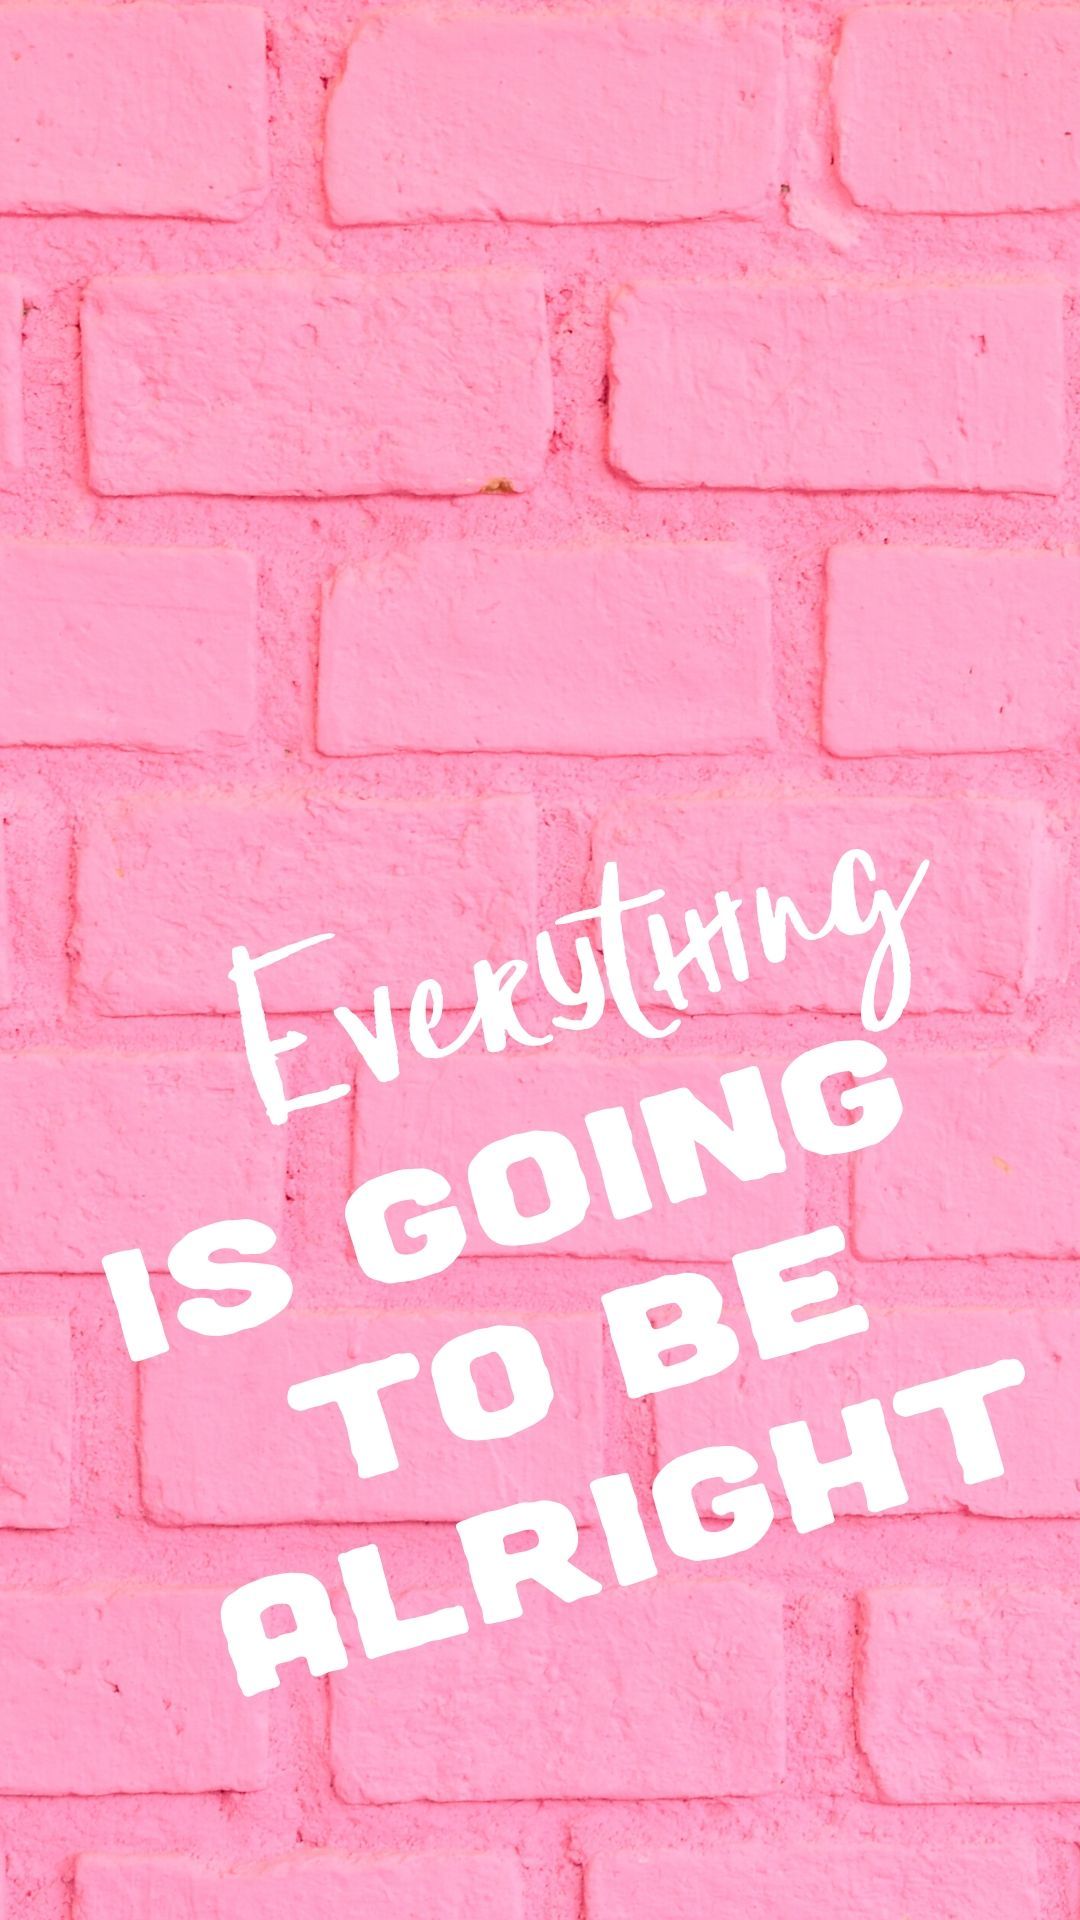 Pink Aesthetic Wallpaper with Quotes and Collages. Pink wallpaper quotes, Quote aesthetic, Pink aesthetic